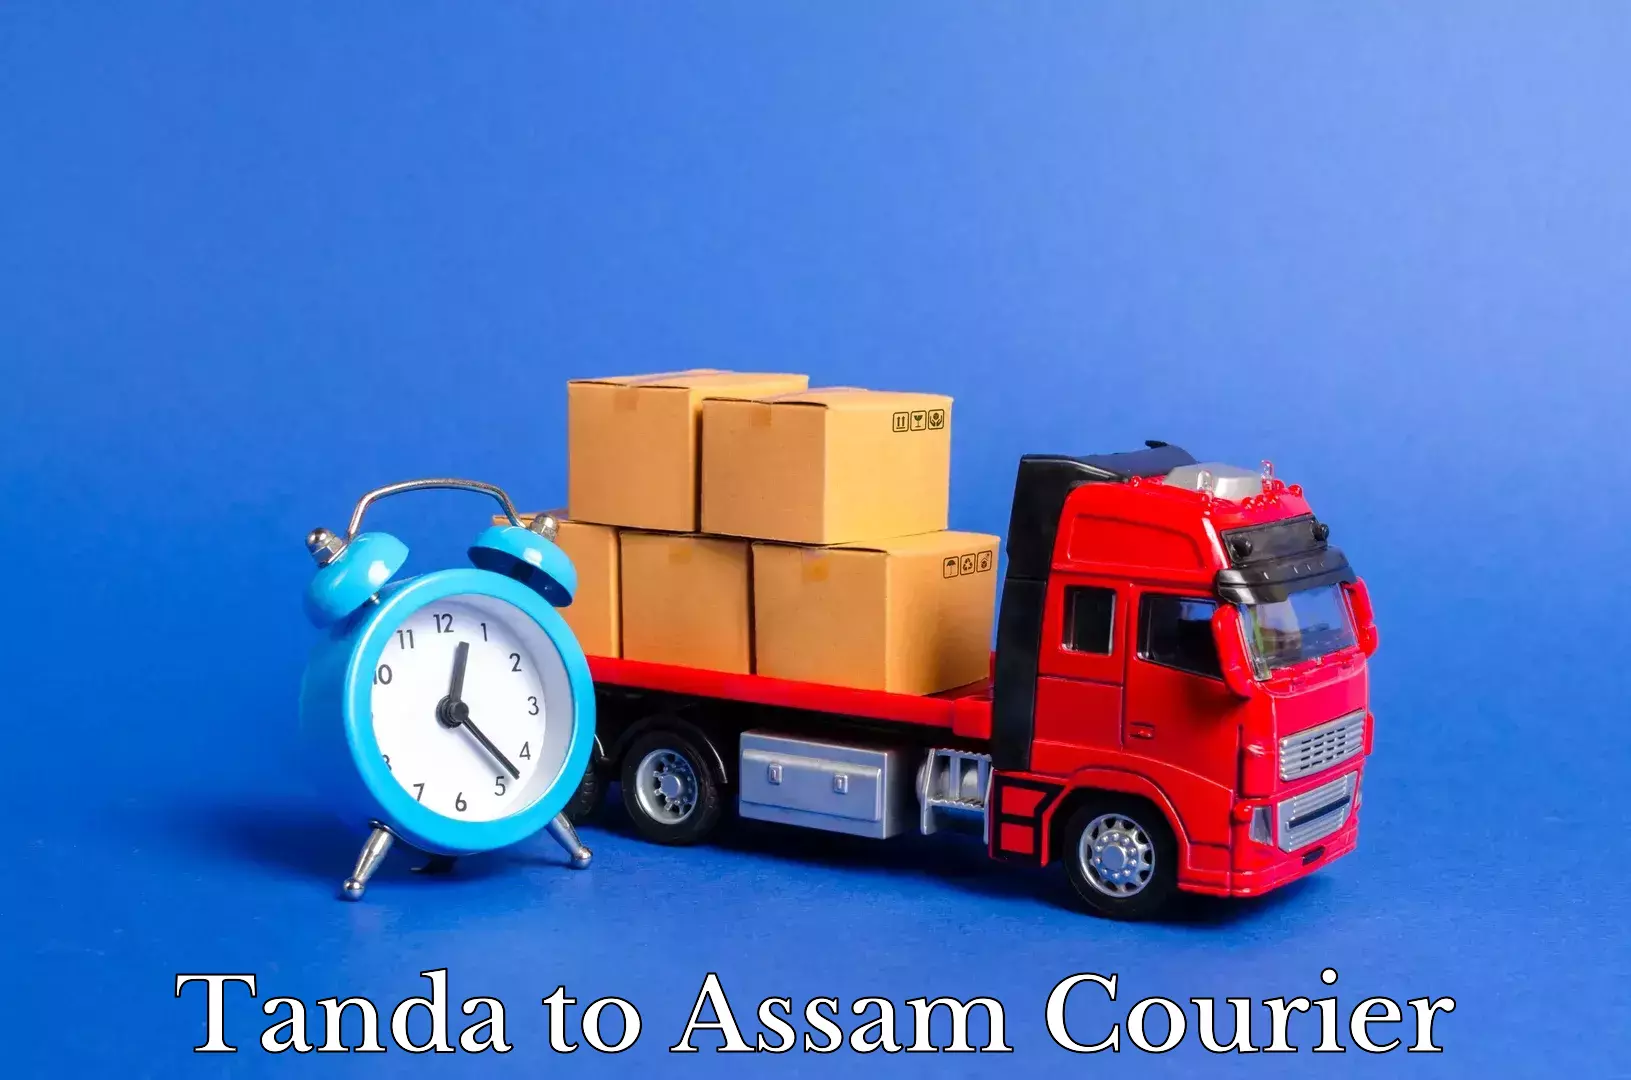 Professional movers and packers Tanda to Guwahati